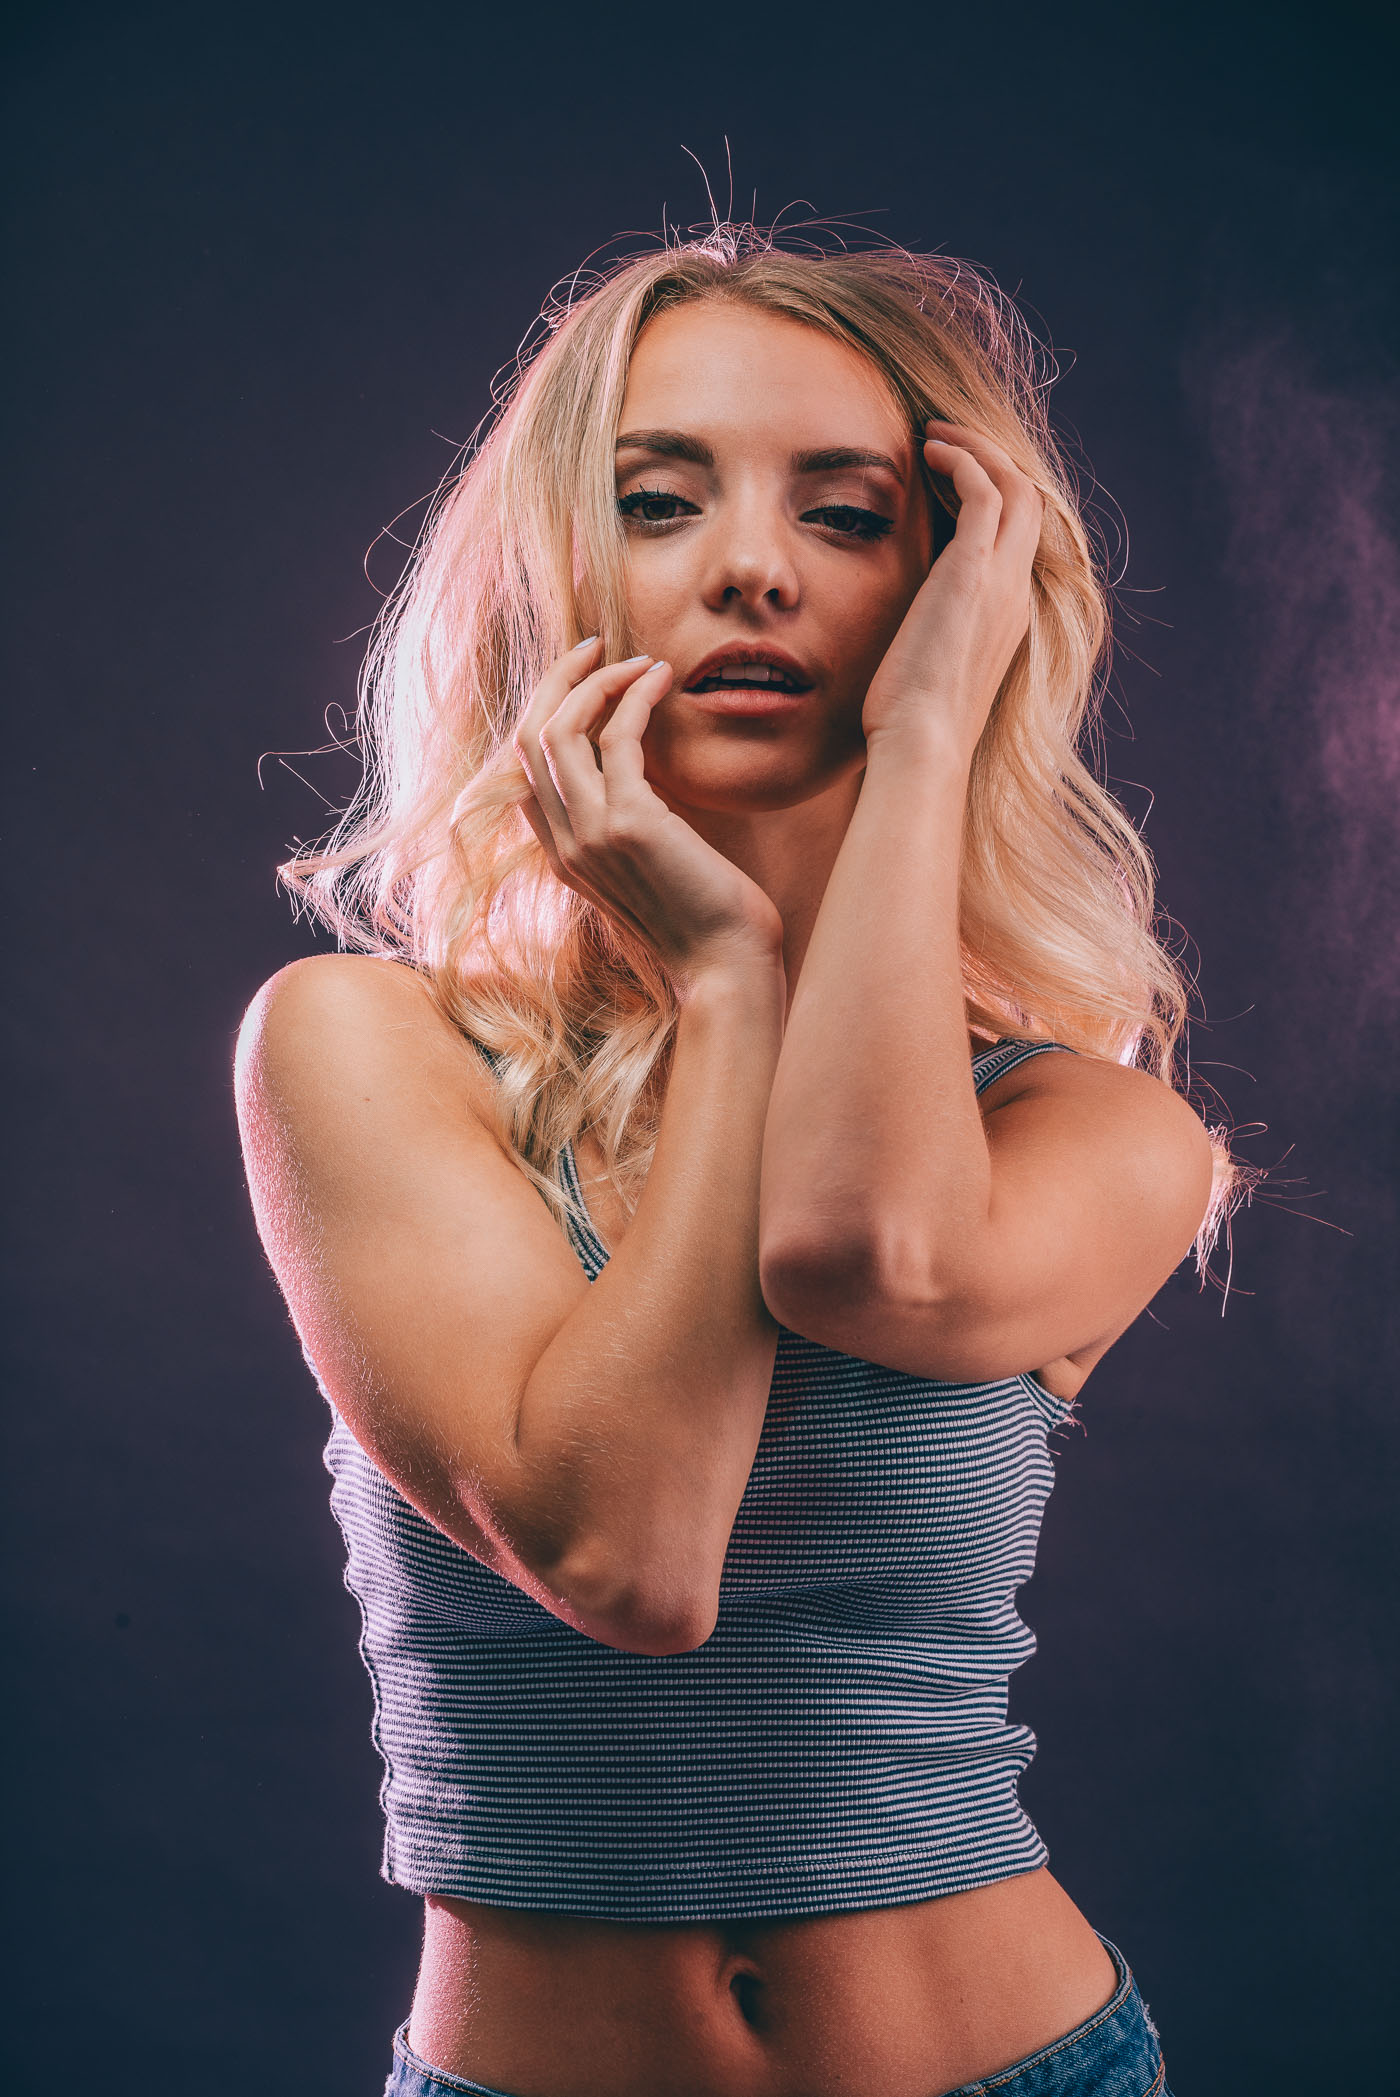 Studio portrait photography of model Anna Hrehlevych in a striped crop top against a navy and pink background with her hands by her face